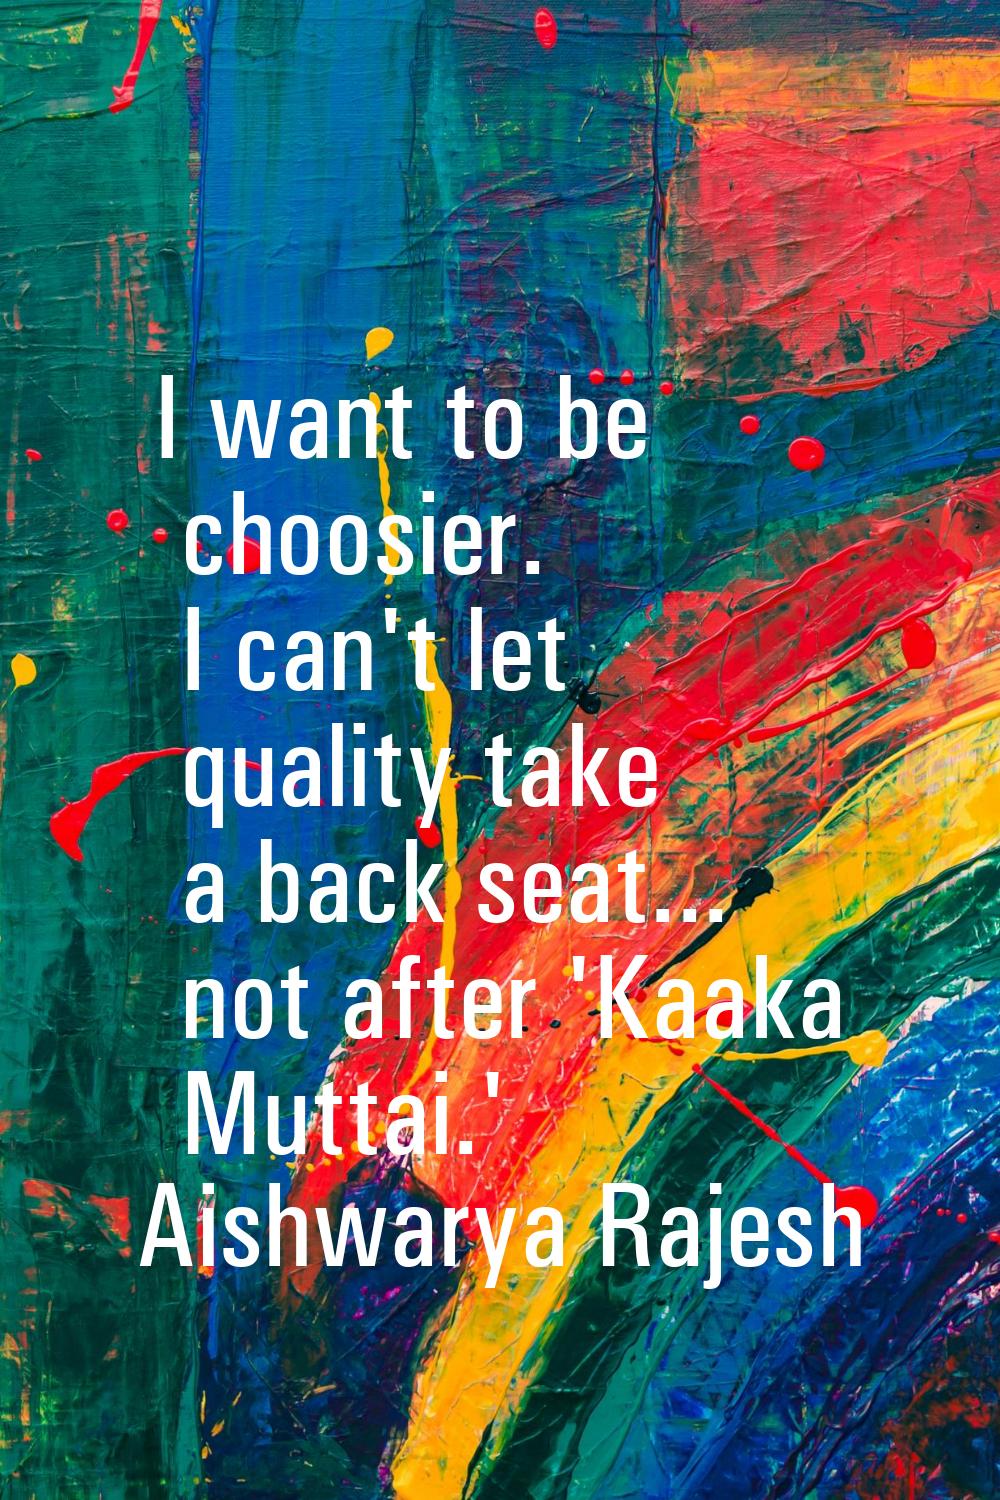 I want to be choosier. I can't let quality take a back seat... not after 'Kaaka Muttai.'